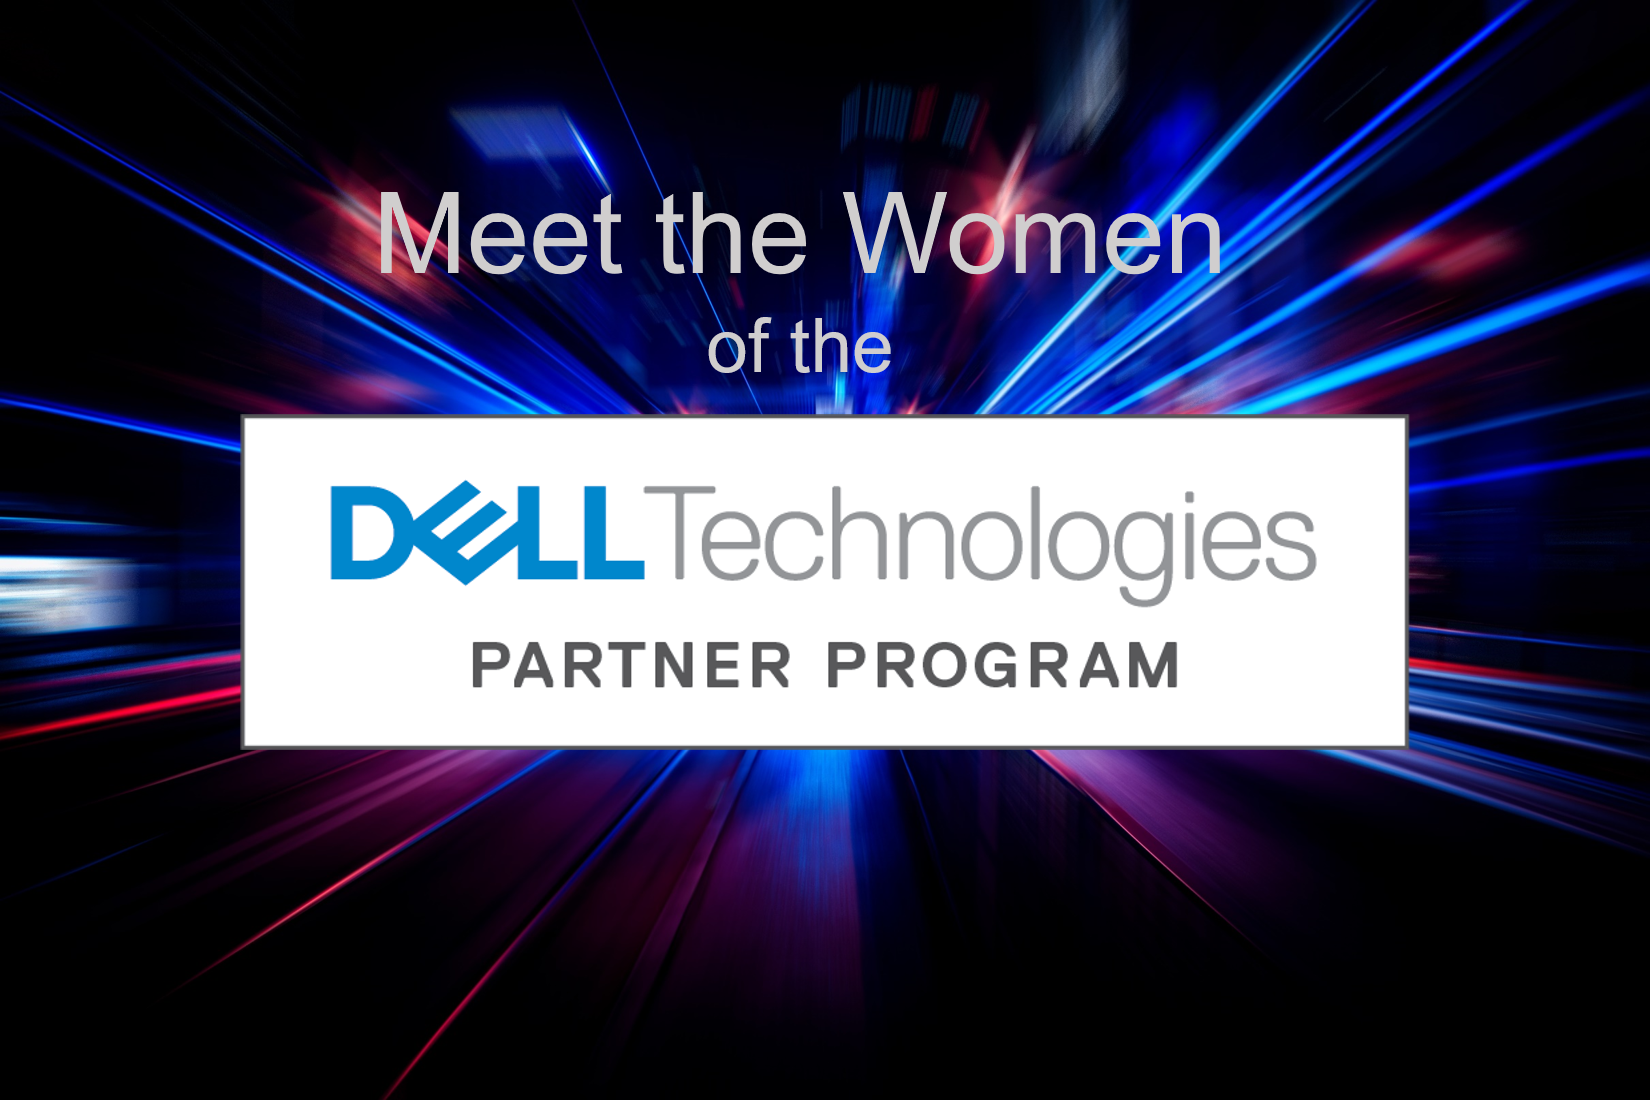 meet-the-women-of-the-dell-technologies-partner-program-patty-scire